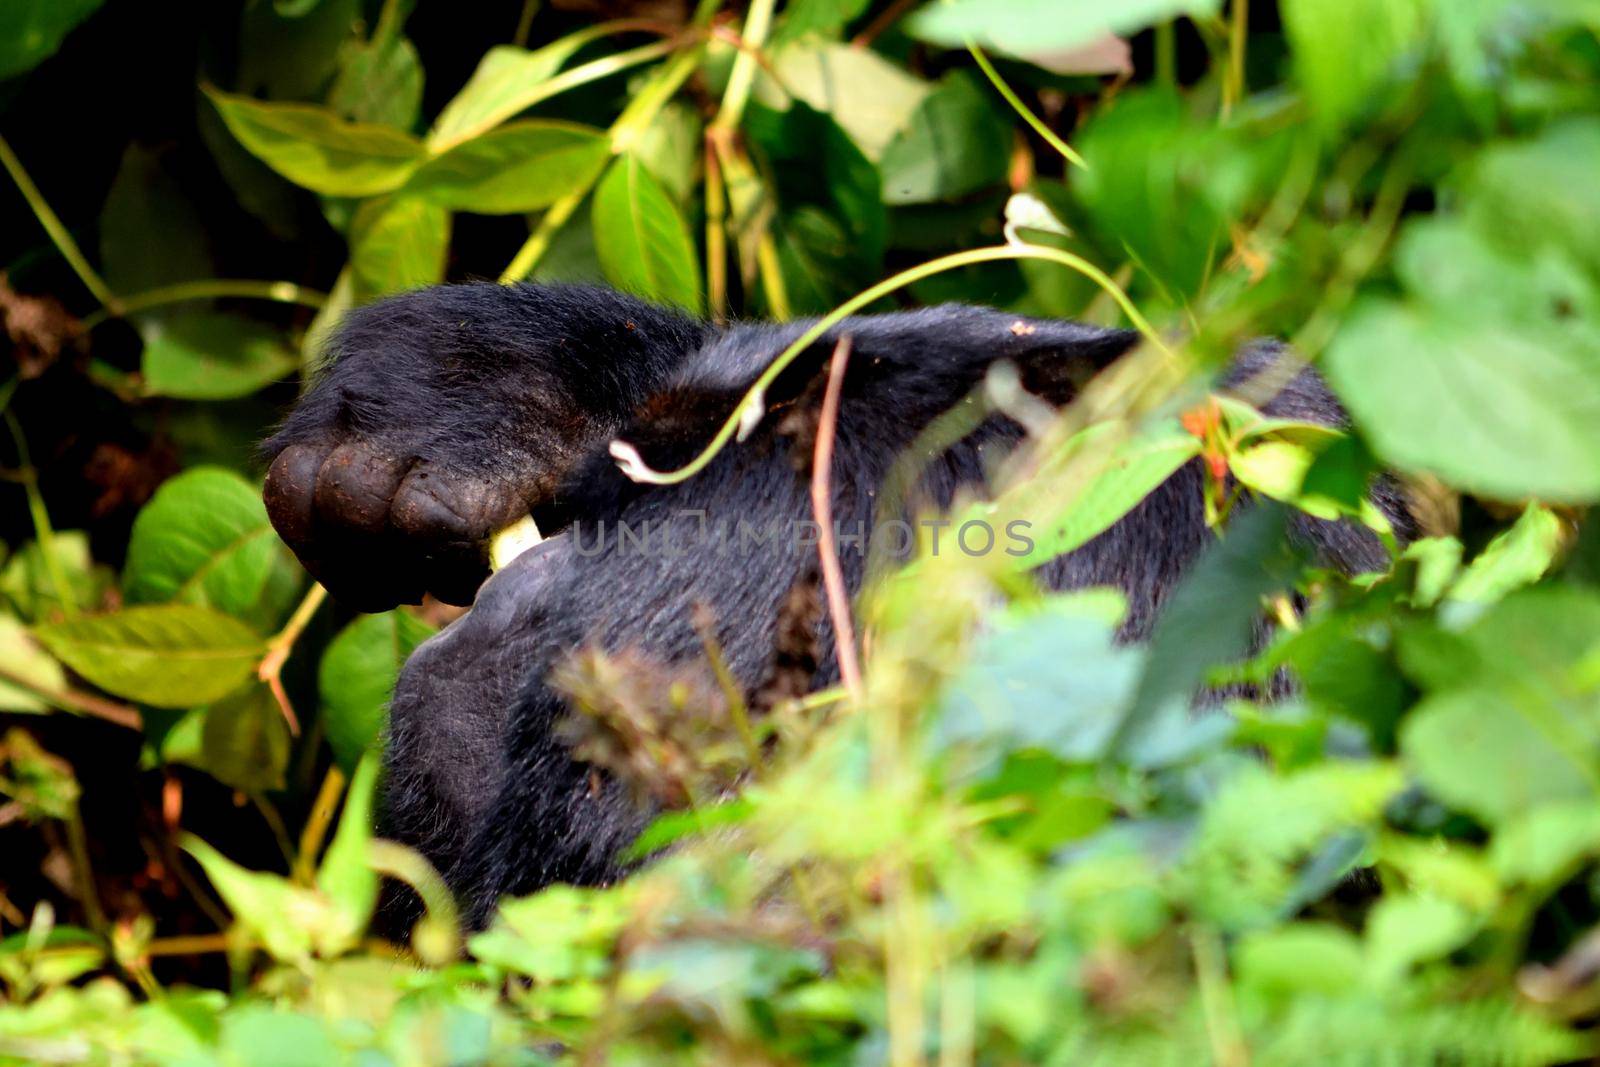 Closeup of a mountain gorilla silverback eating foliage in the Bwindi Impenetrable Forest by silentstock639